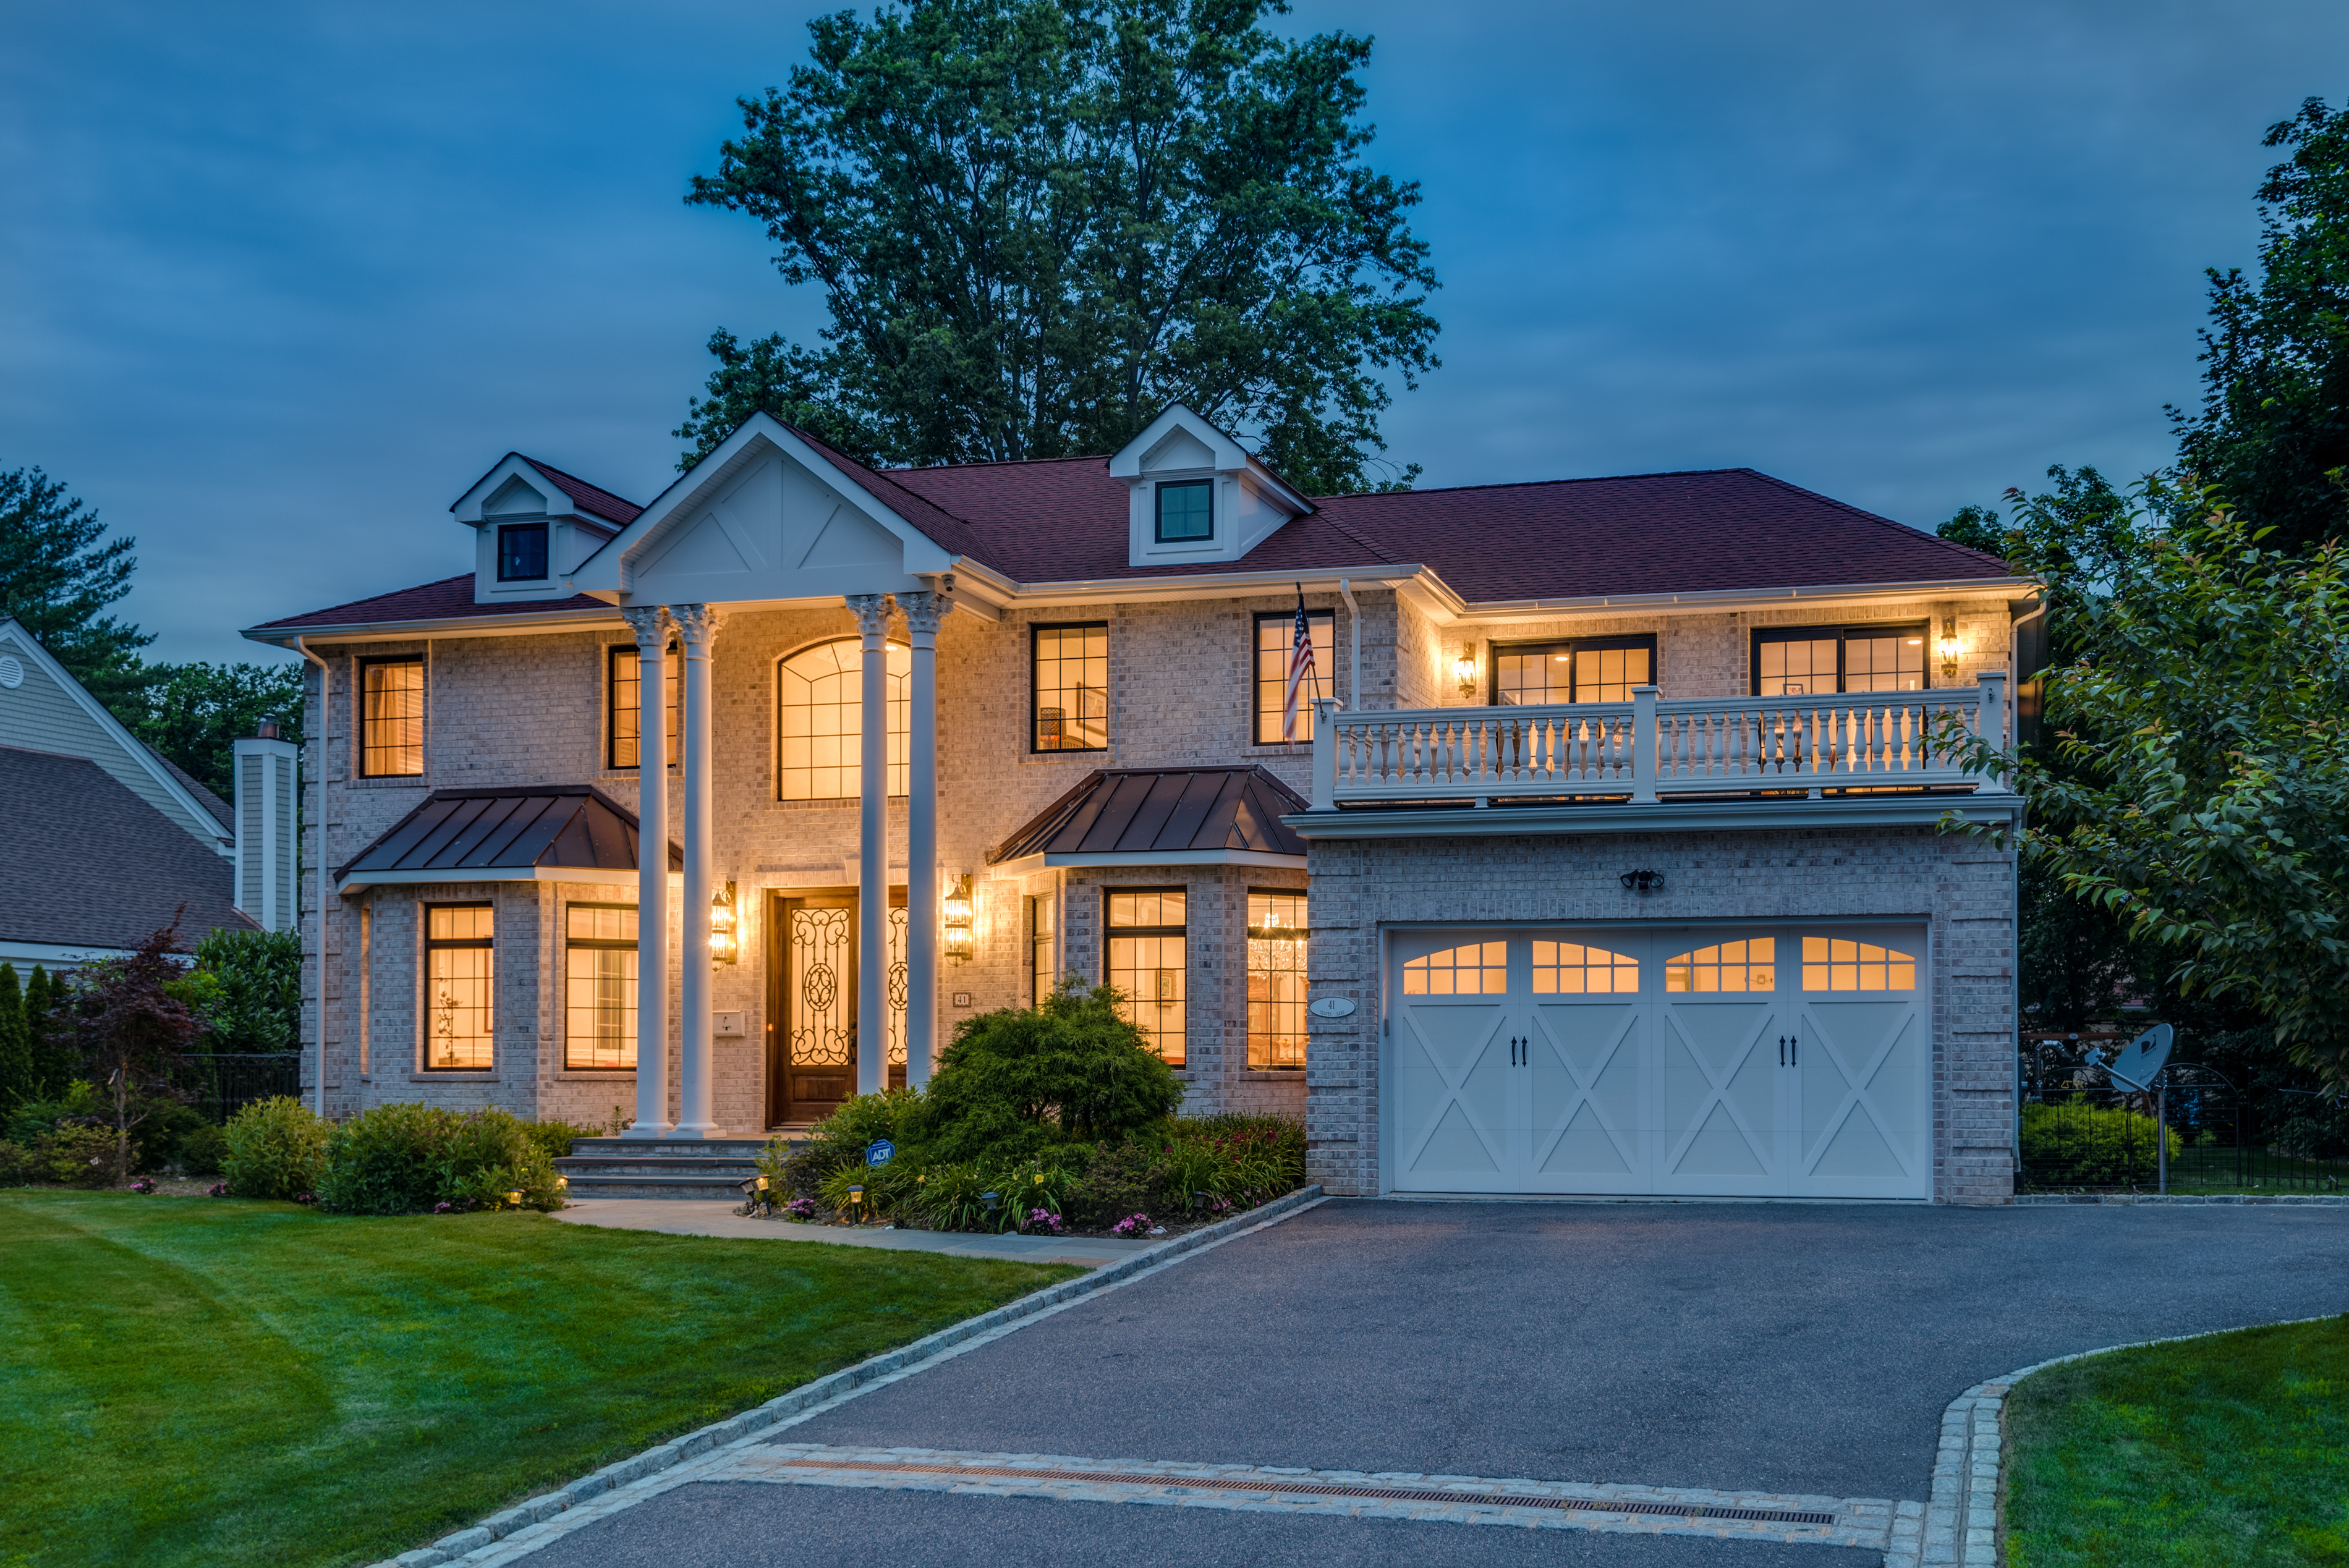 Just Listed!  Magnificent Custom Built Brick Colonial Located In The Heart Of Roslyn Country Club